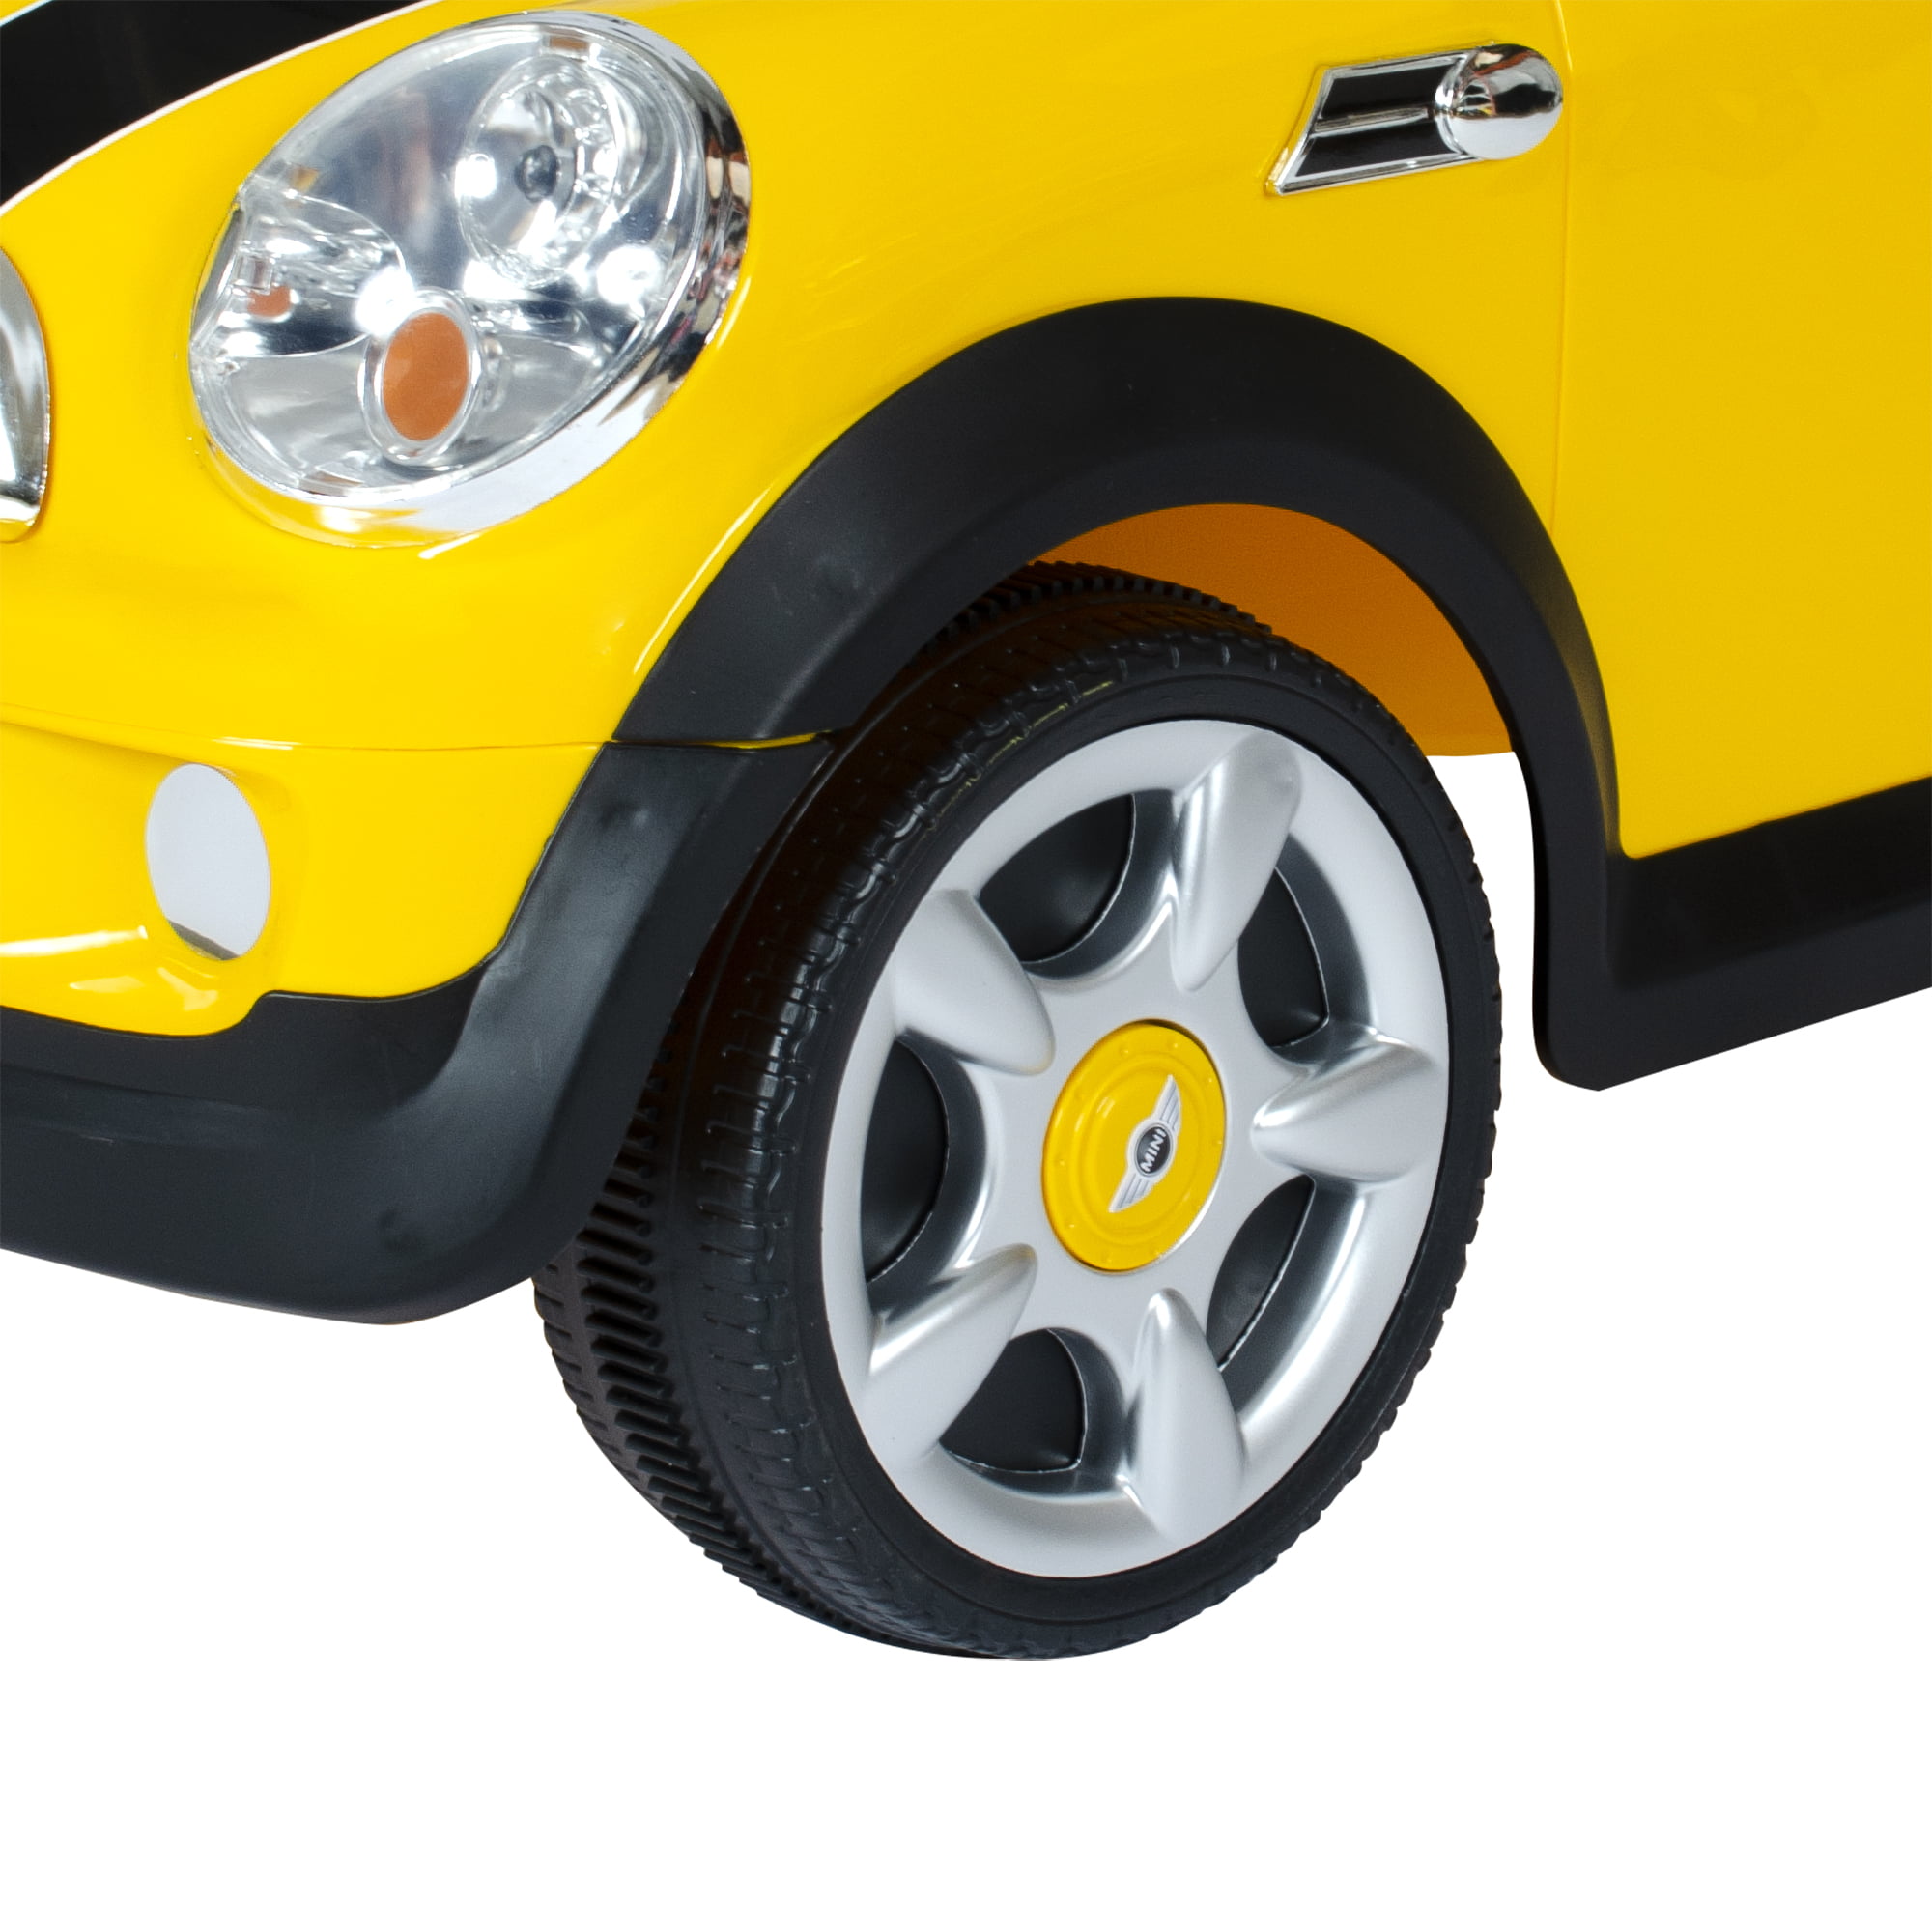 With Remote Control Up to 35 kg MINI Cooper S Roadster For Children 3 Years and Older Up to 4 km/h Reverse Gear Red ROLLPLAY Electric Car 6-Volt Battery 